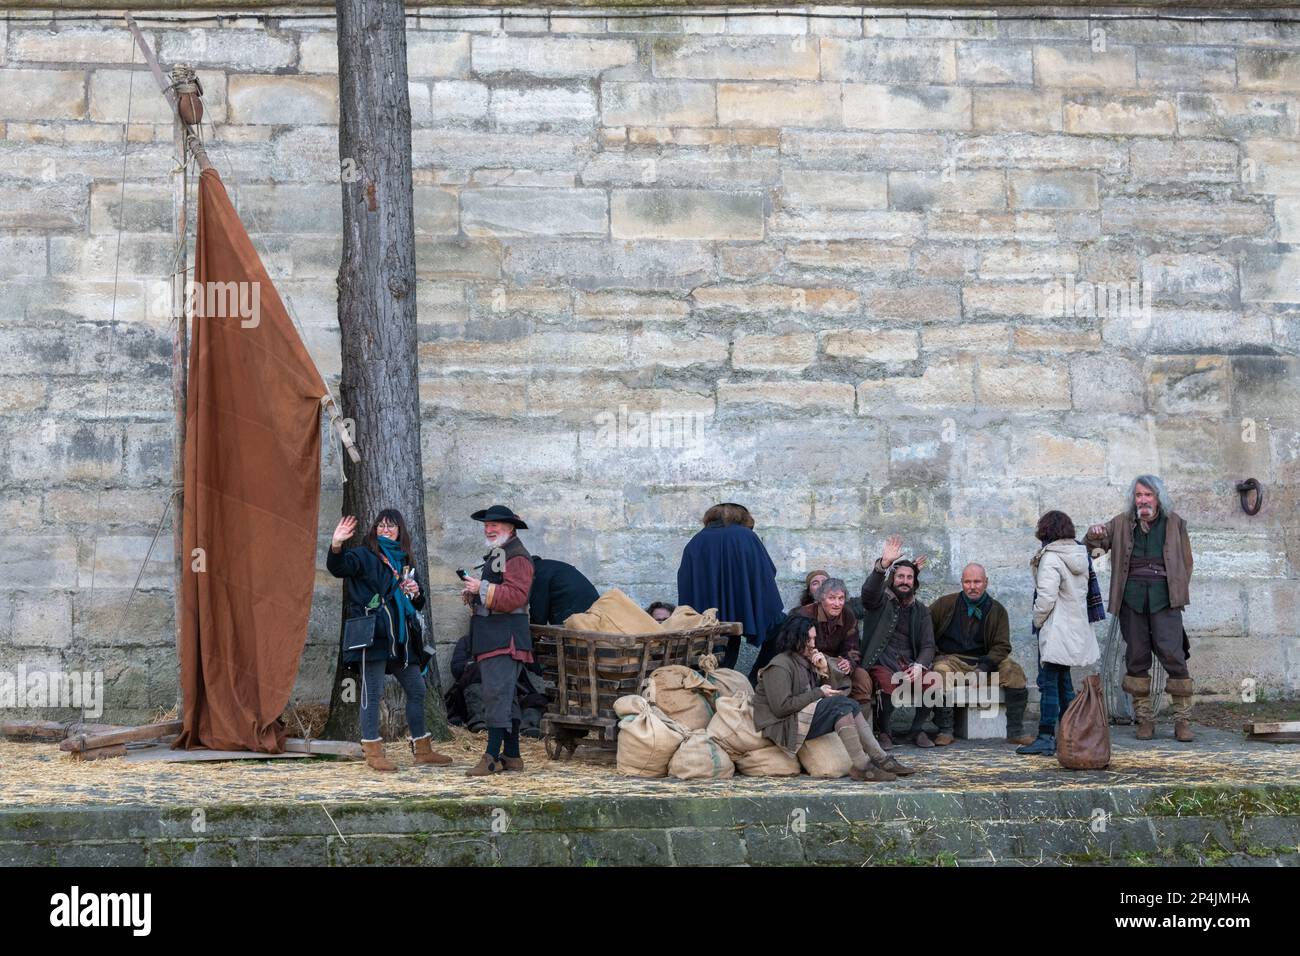 Actors in Medieval costume on an open air set next to The River Seine, Paris. Stock Photo